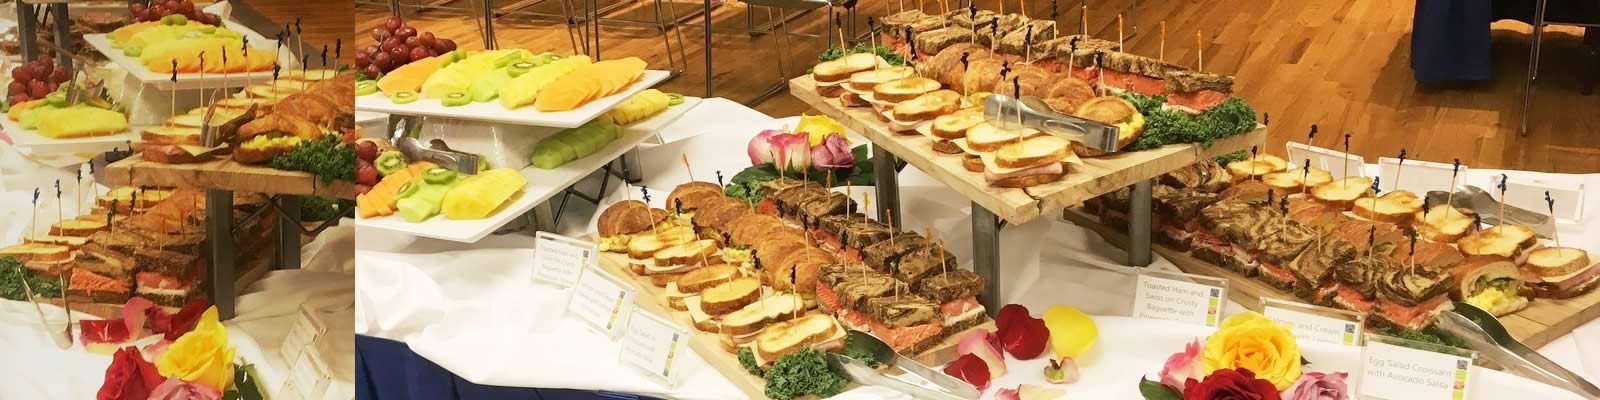 Catered food spread of sliced fruits, sandwiches and flower arrangements